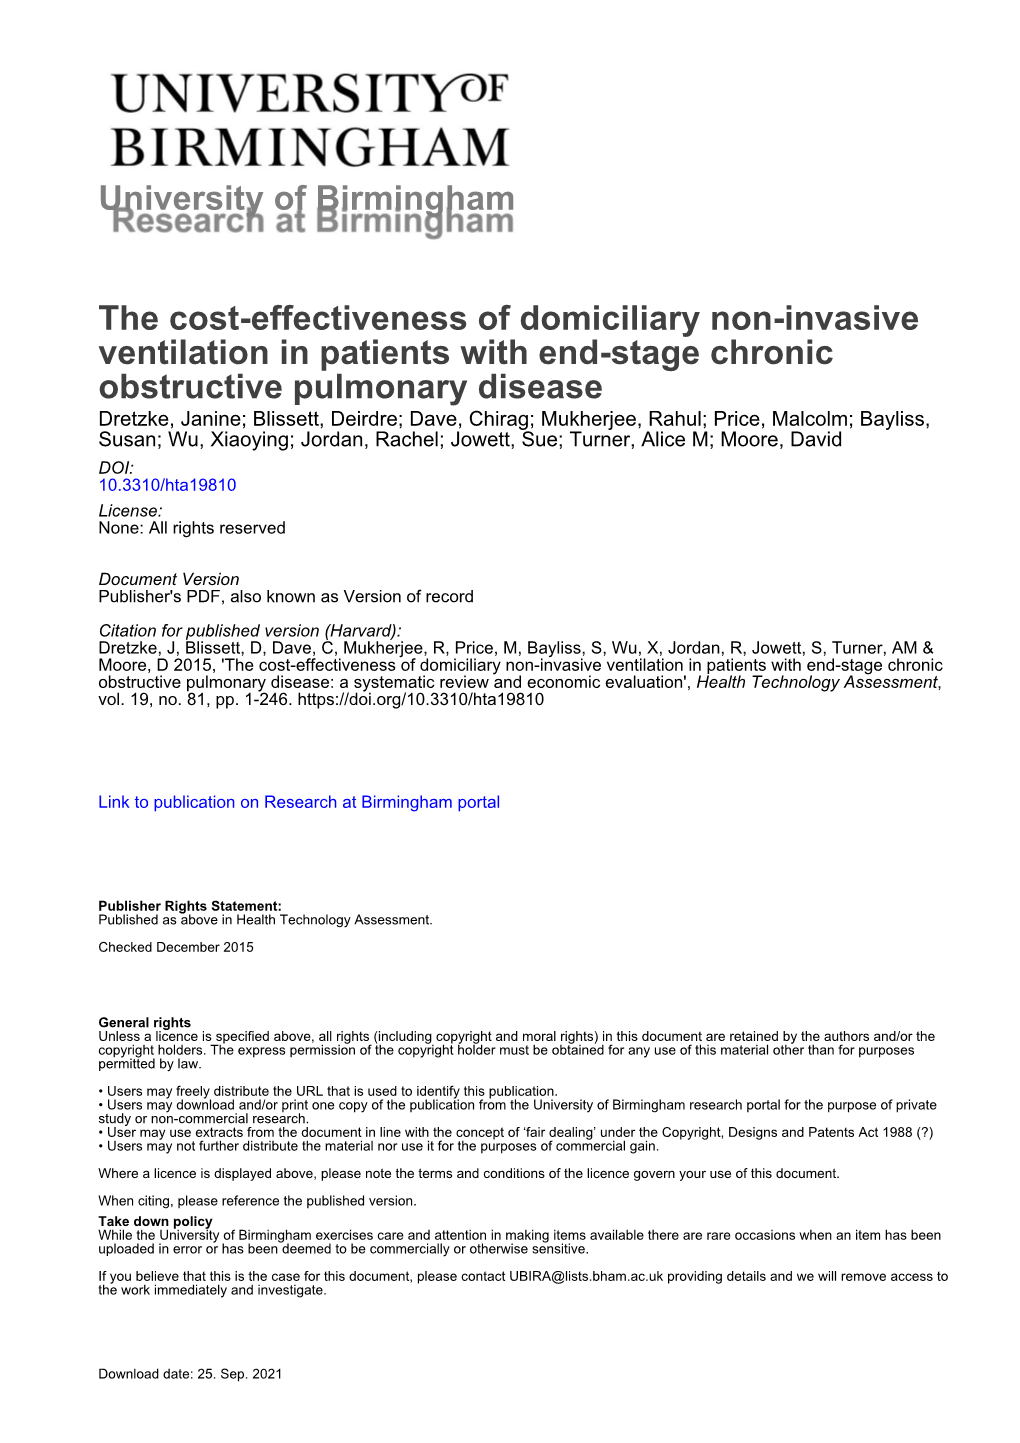 The Cost-Effectiveness of Domiciliary Non-Invasive Ventilation in Patients with End-Stage Chronic Obstructive Pulmonary Disease